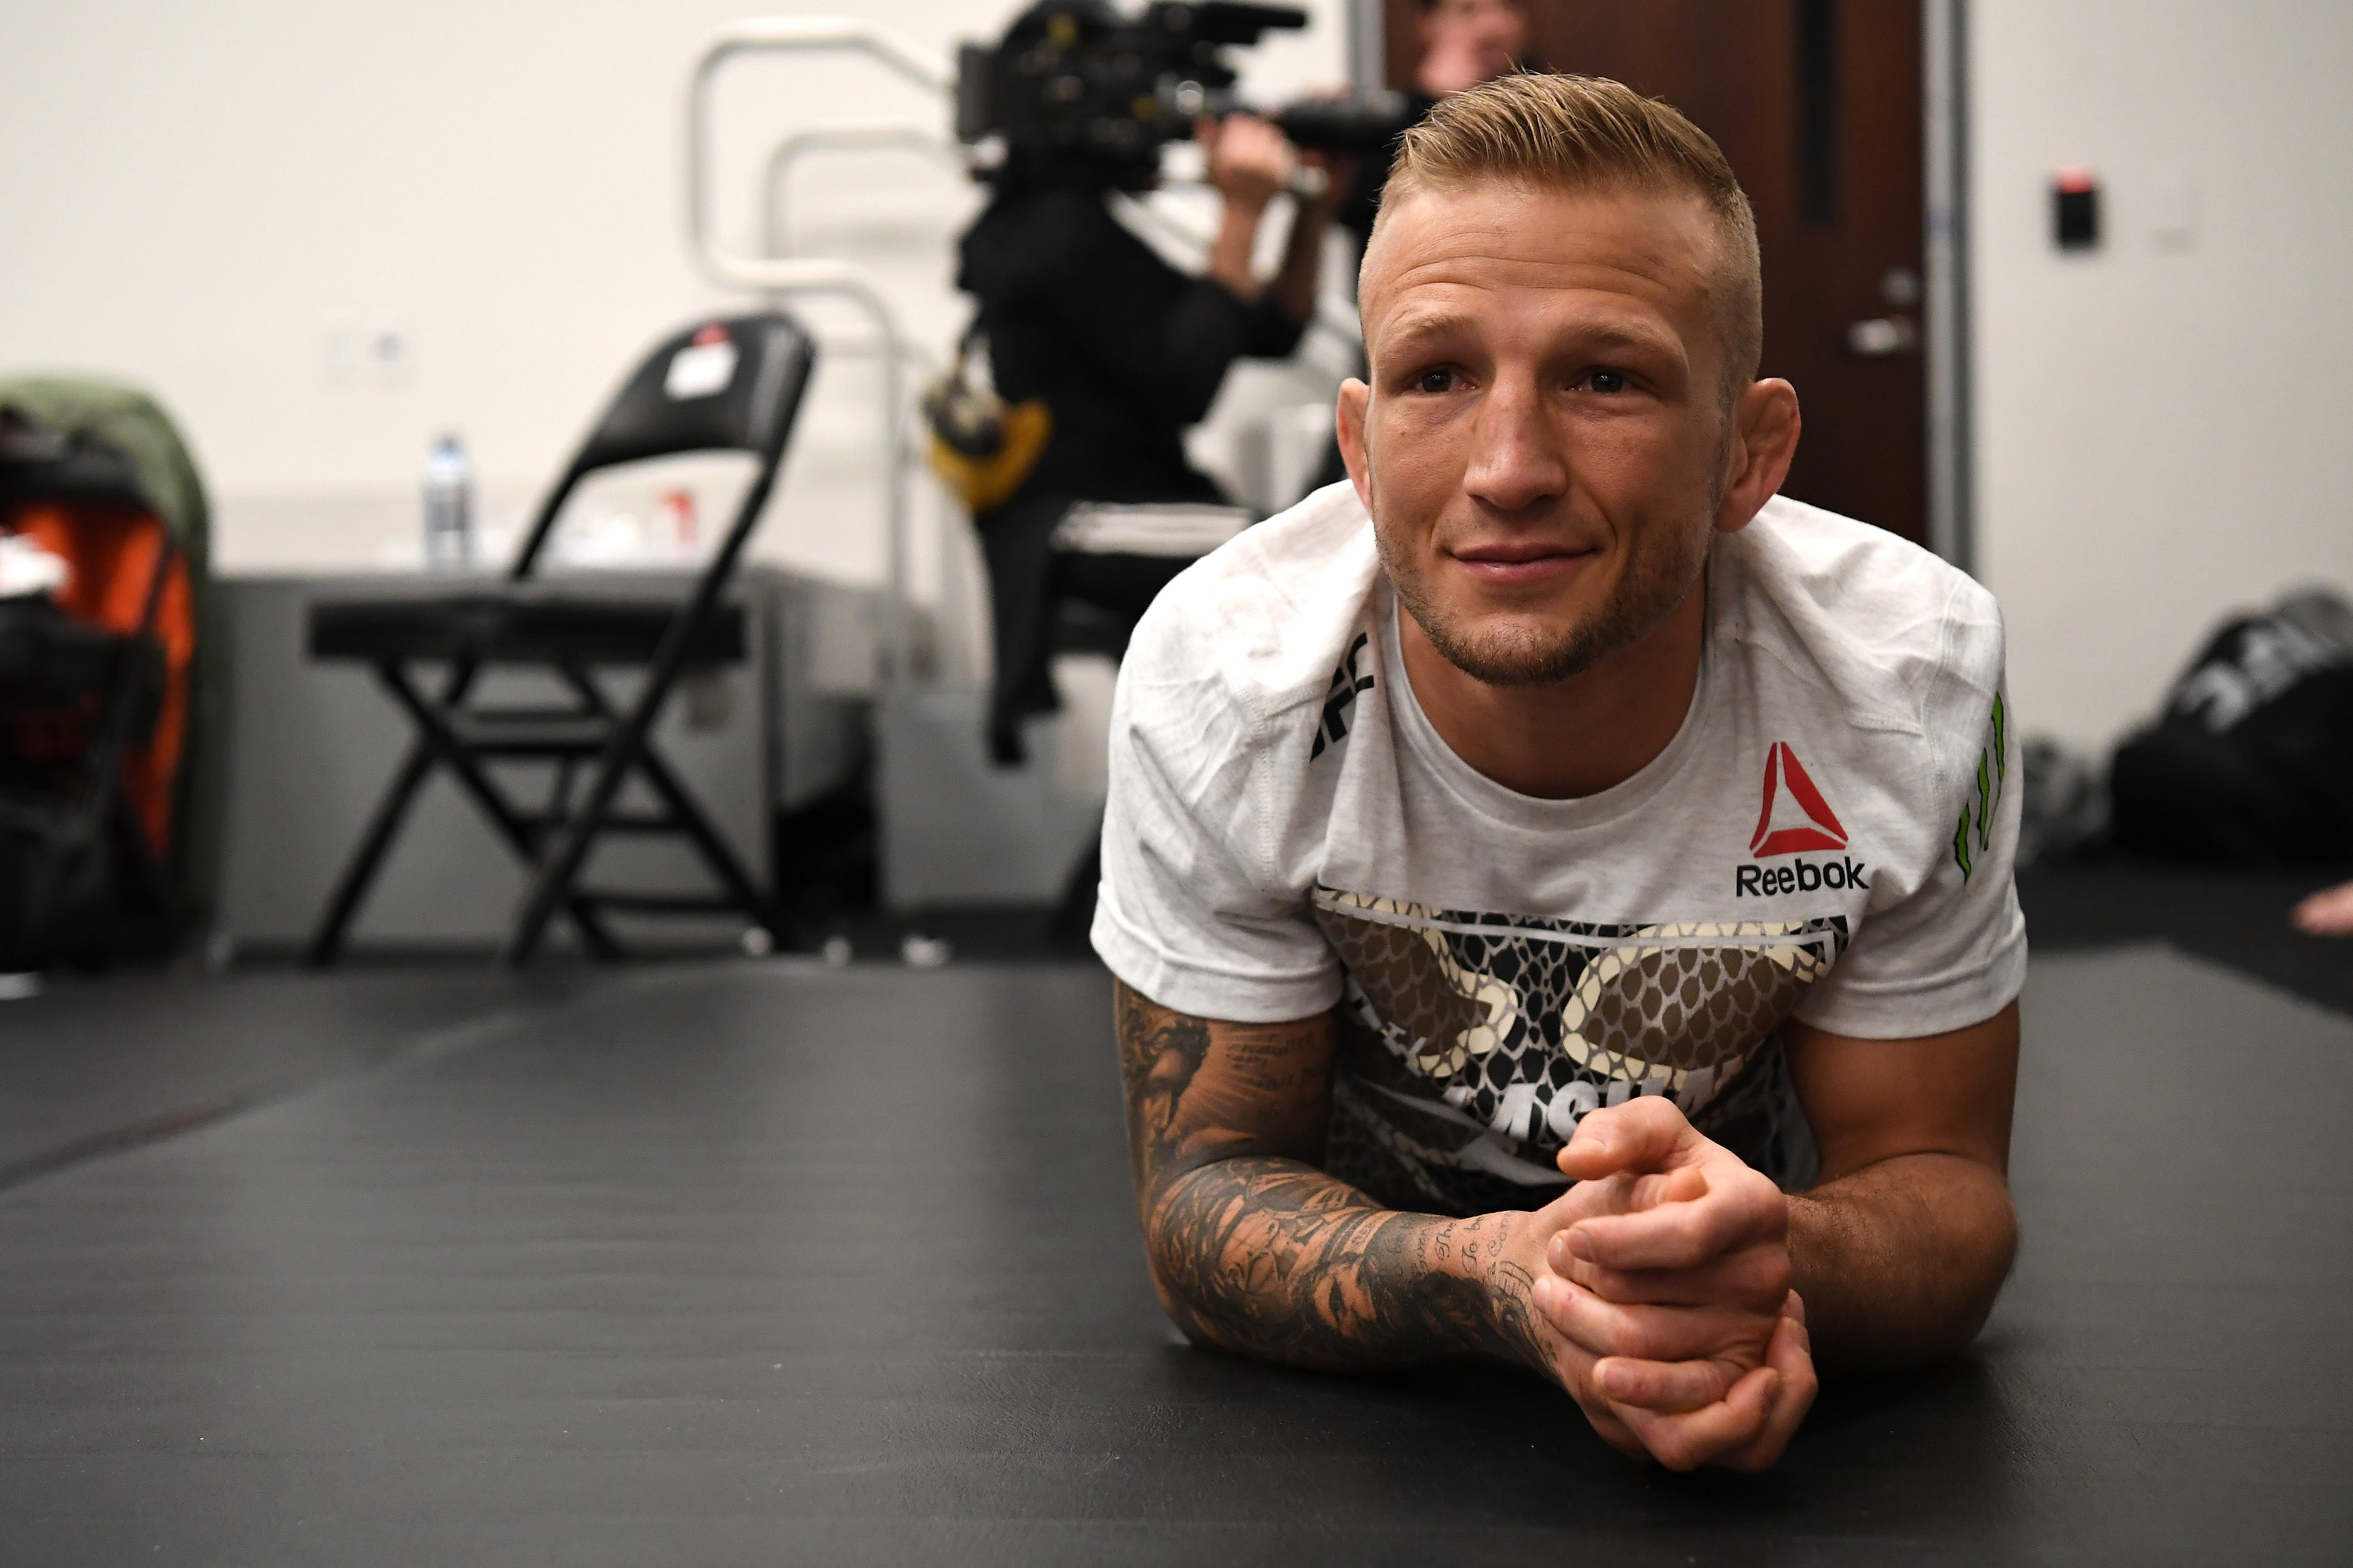 TJ Dillashaw backstage ahead of his flyweight title fight against Henry Cejudo.